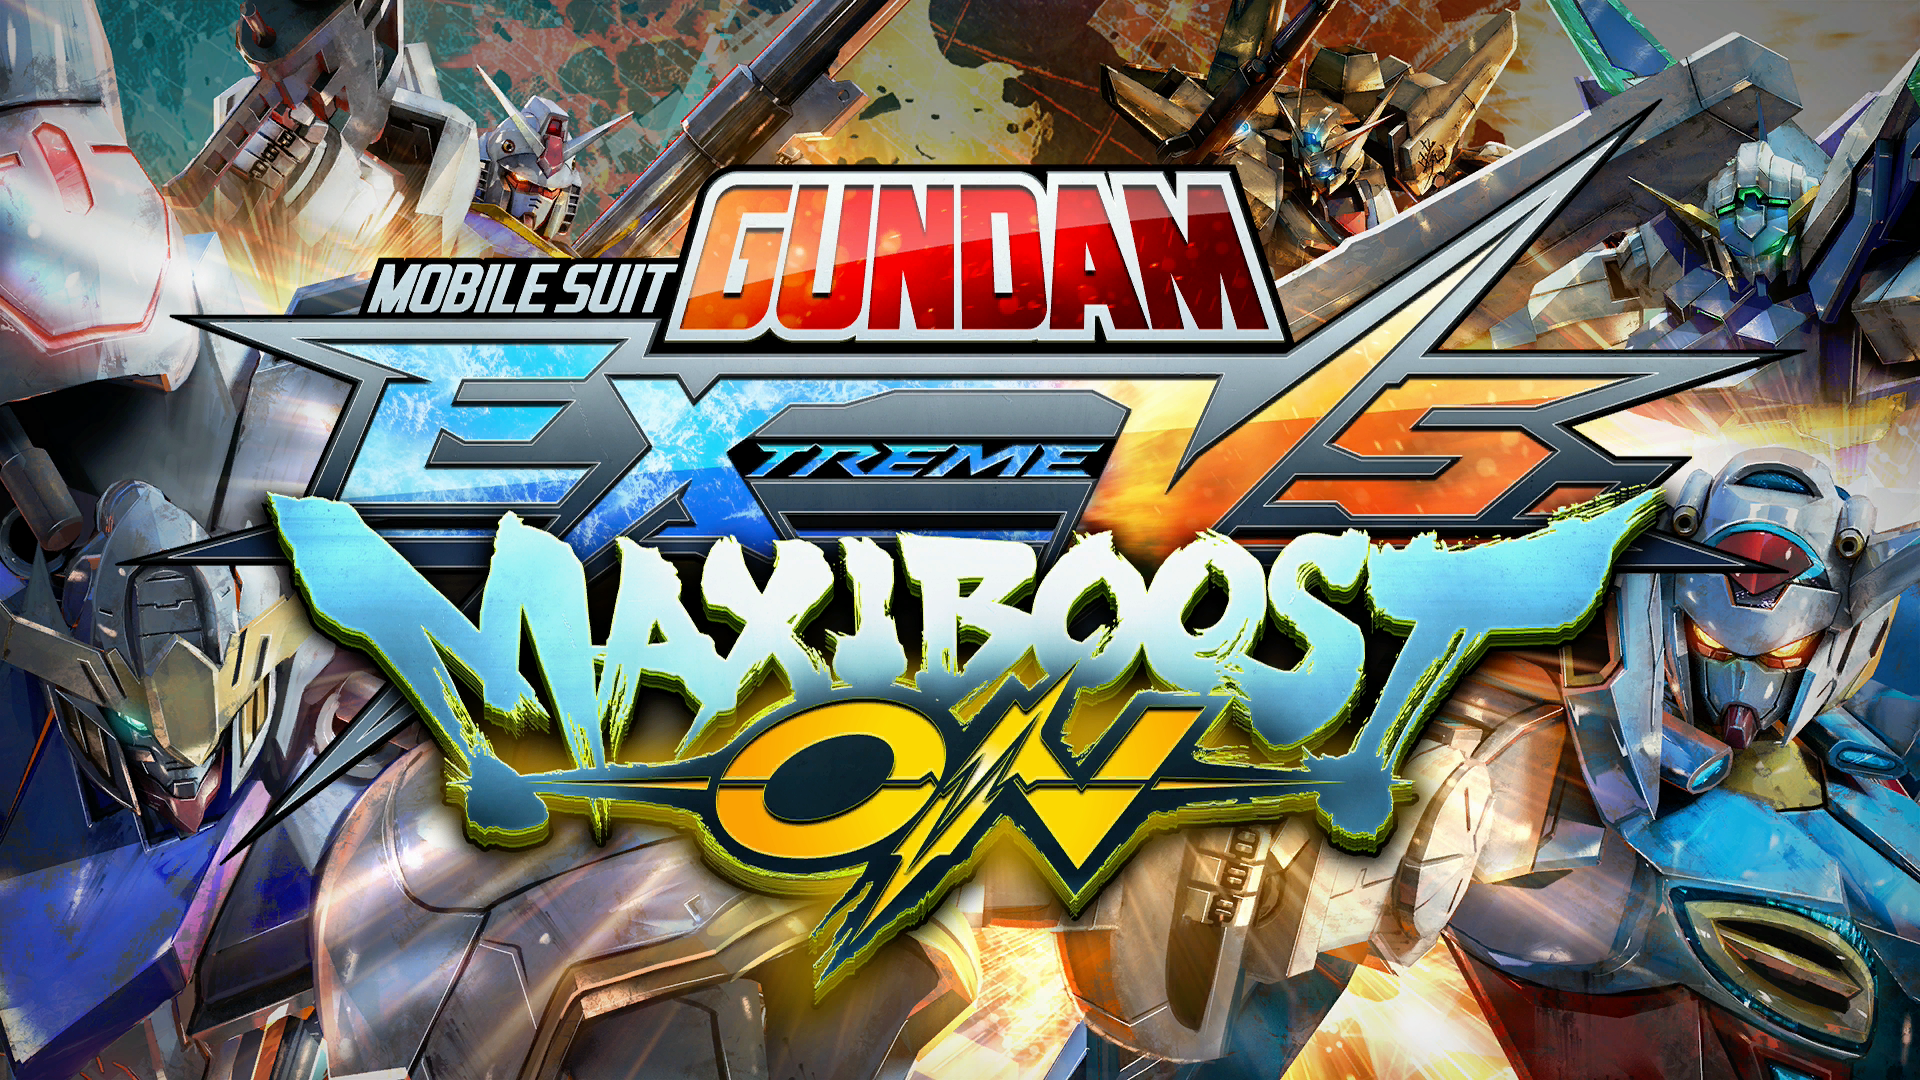 Mobile Suit Gundam: Extreme VS. Maxi Boost ON Review